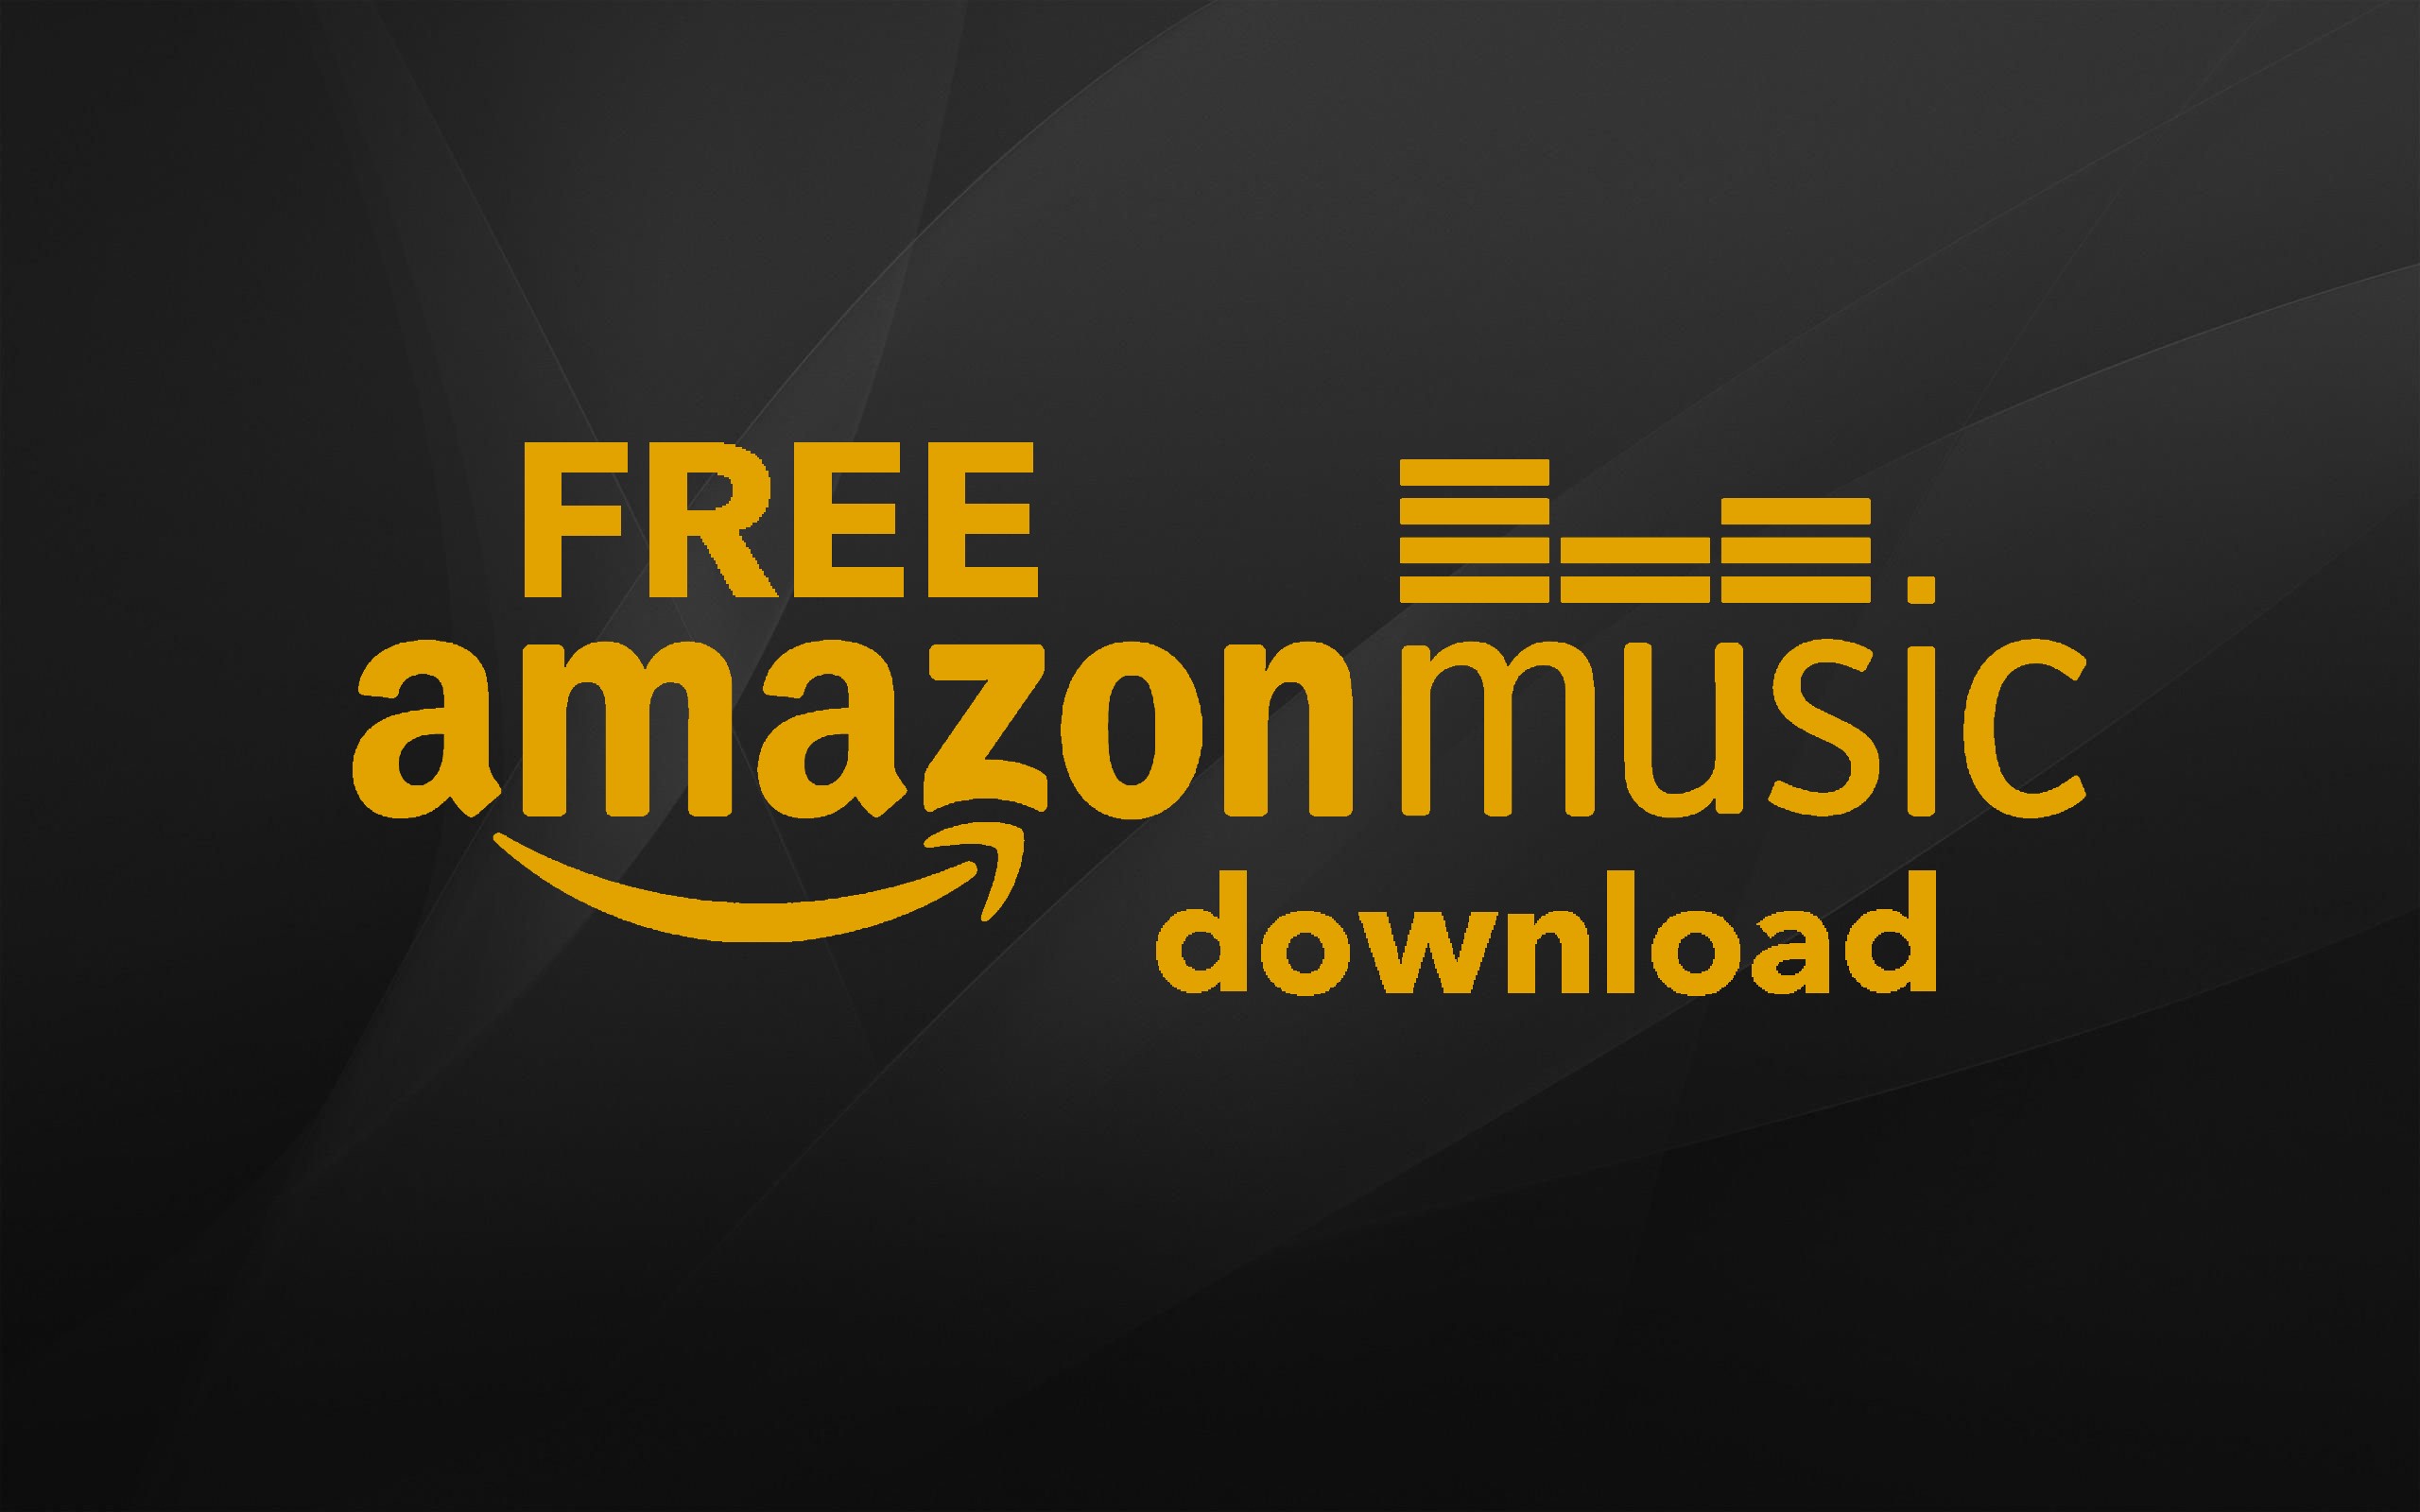 Download your favorite music in highest quality with Free Amazon Music Download